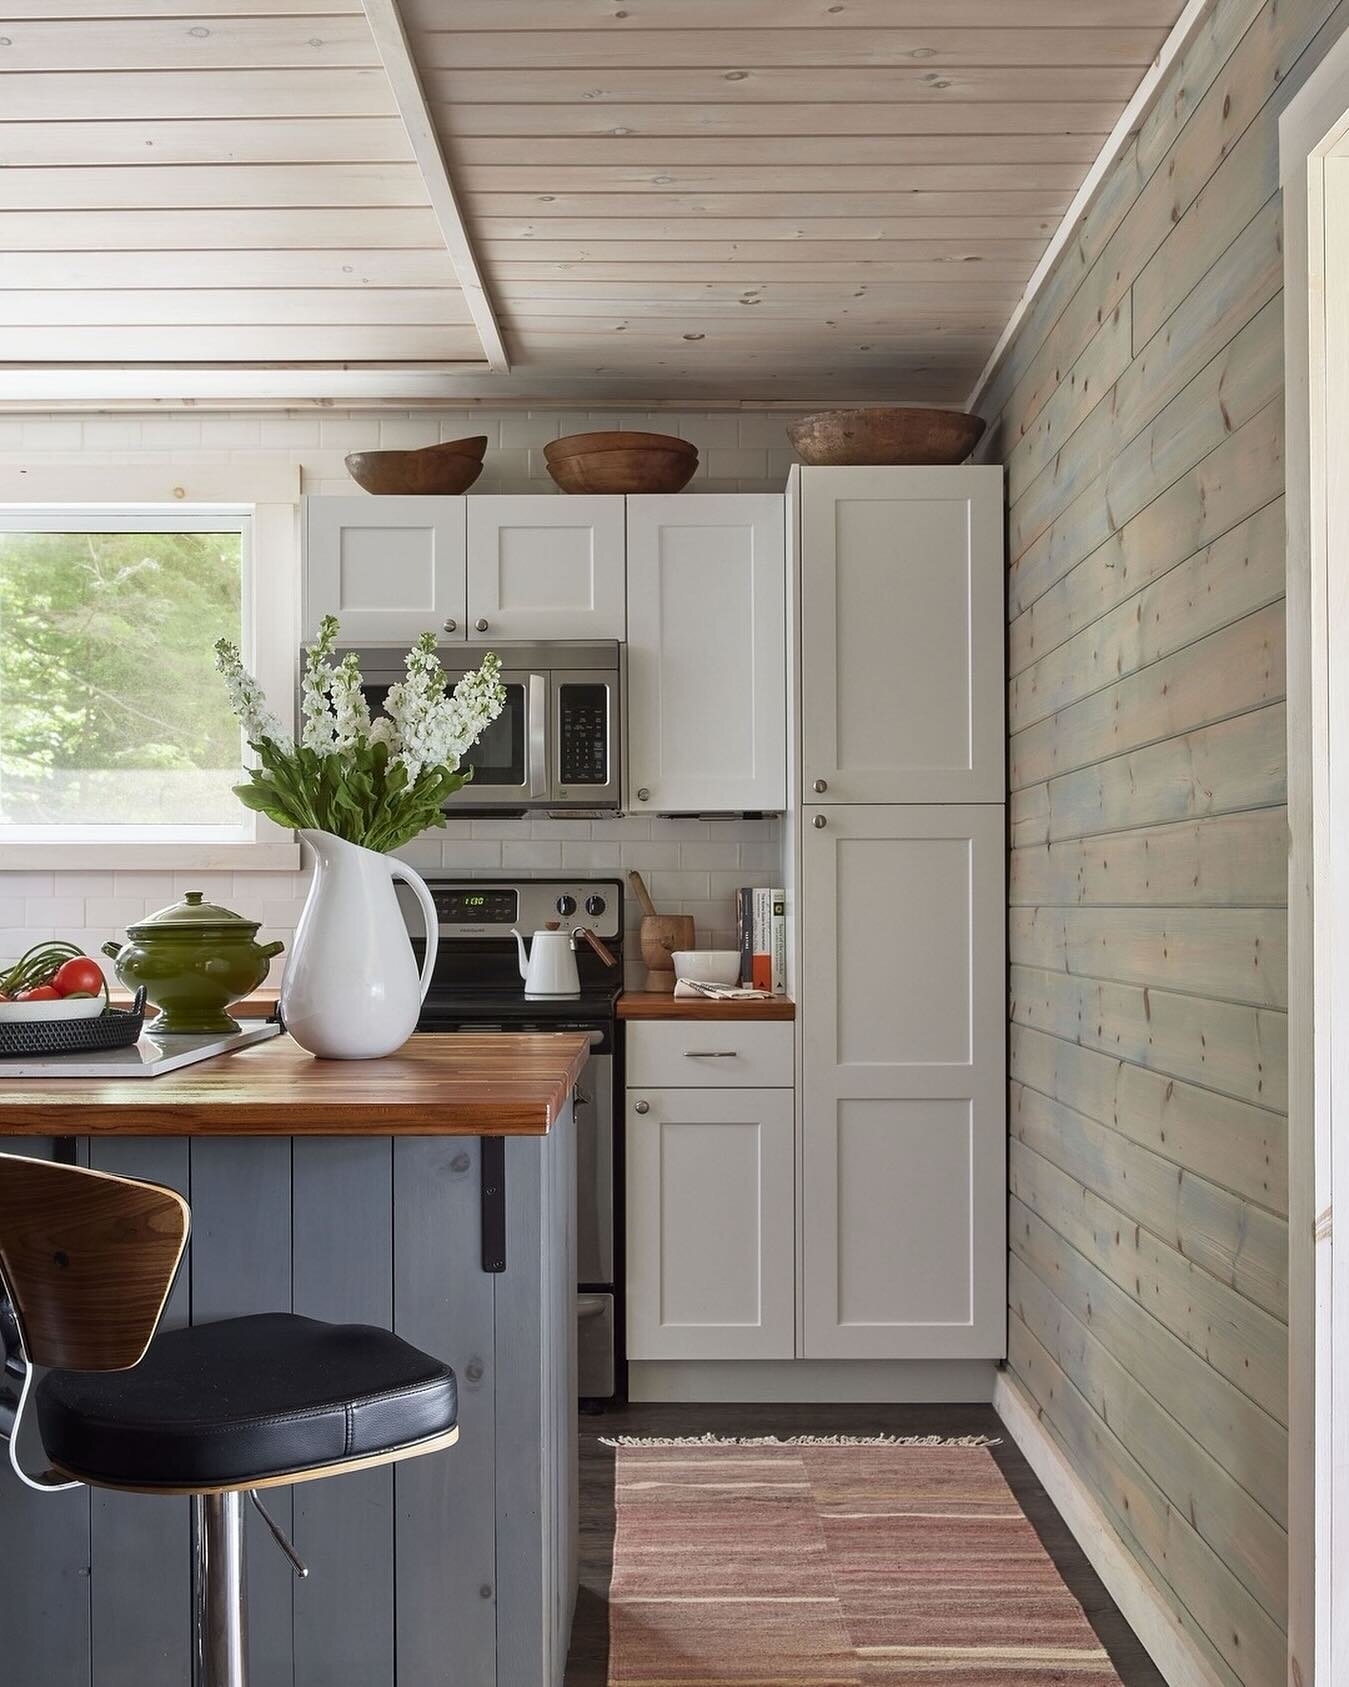 A simple white cottage kitchen, but make it unique! Adding in vintage finds, layers of texture and subtle colour tones give this cottage kitchen a beautiful lived in vibe. #projectlittlelakehouse
Design: @studio_findlay
Photos: @lomillerphoto
Styling